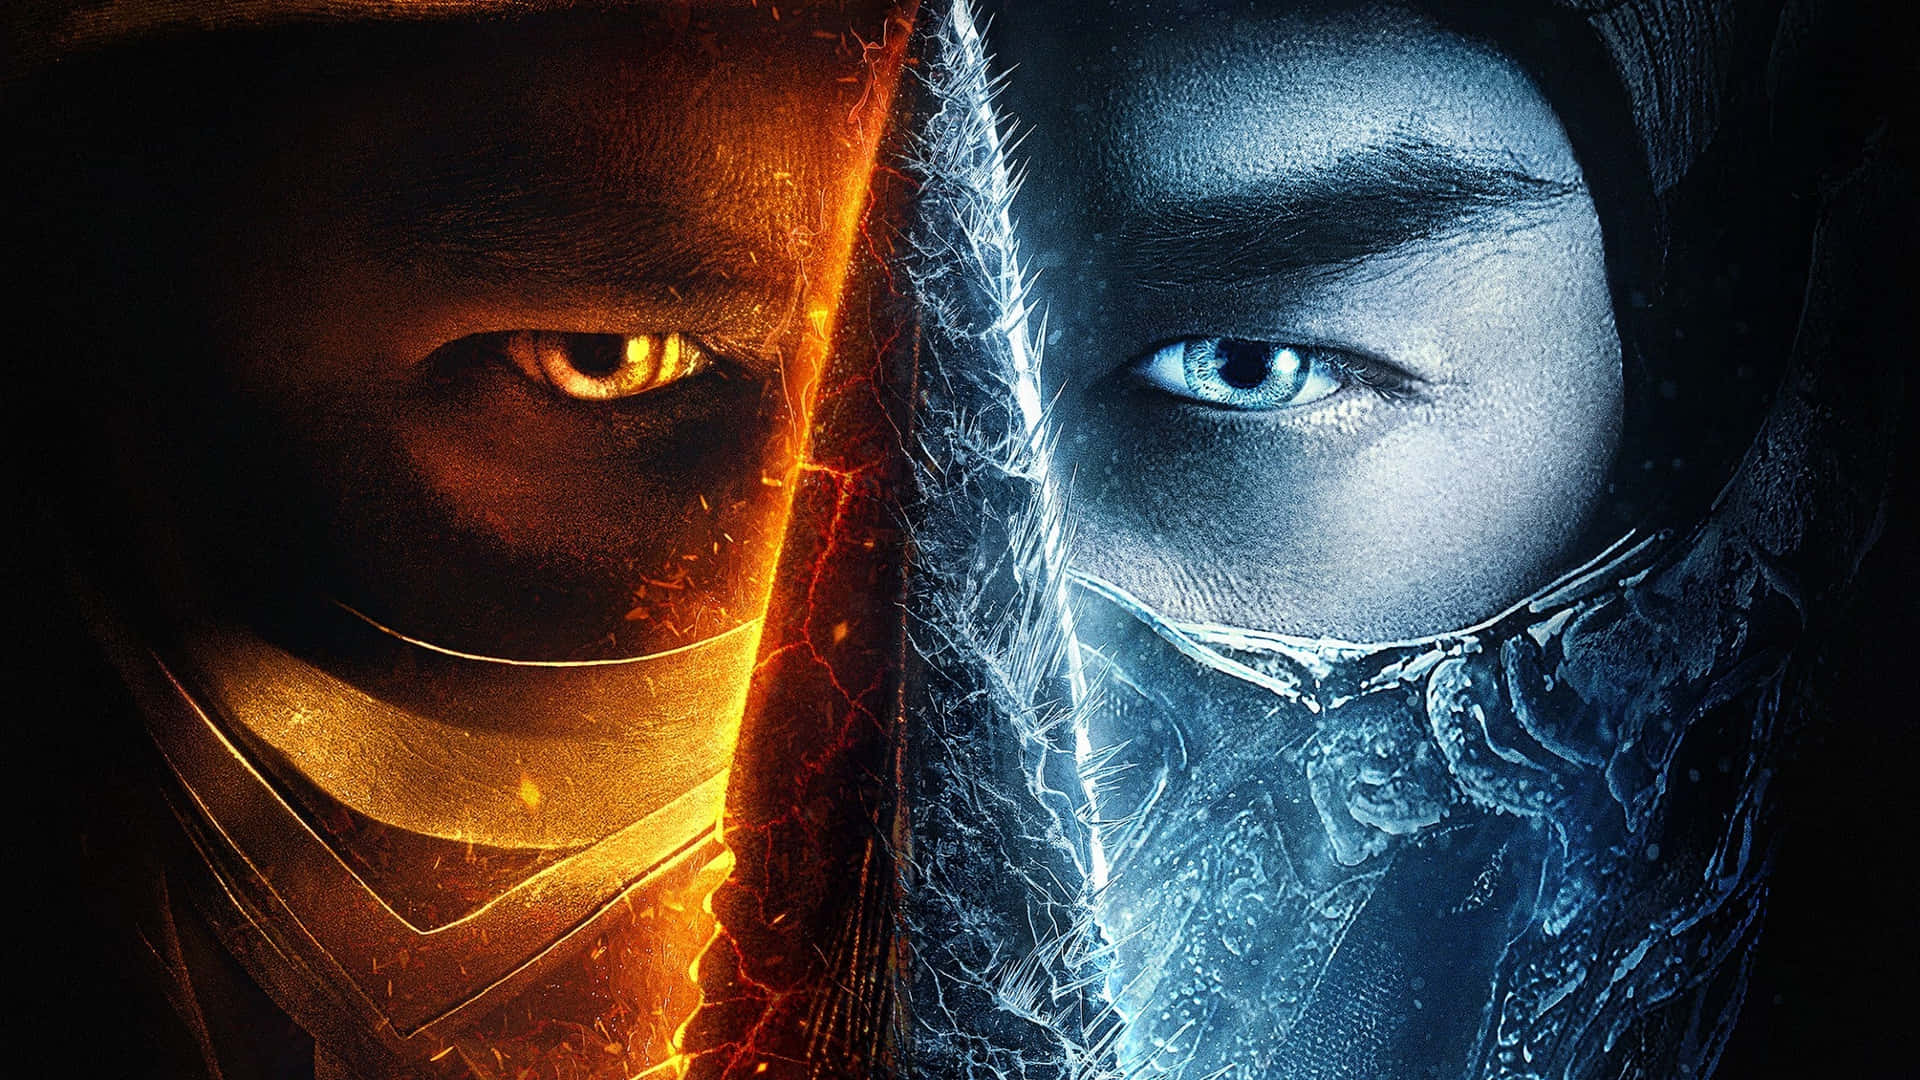 Get Ready to Fight with the All-New Mortal Kombat 2021 Wallpaper